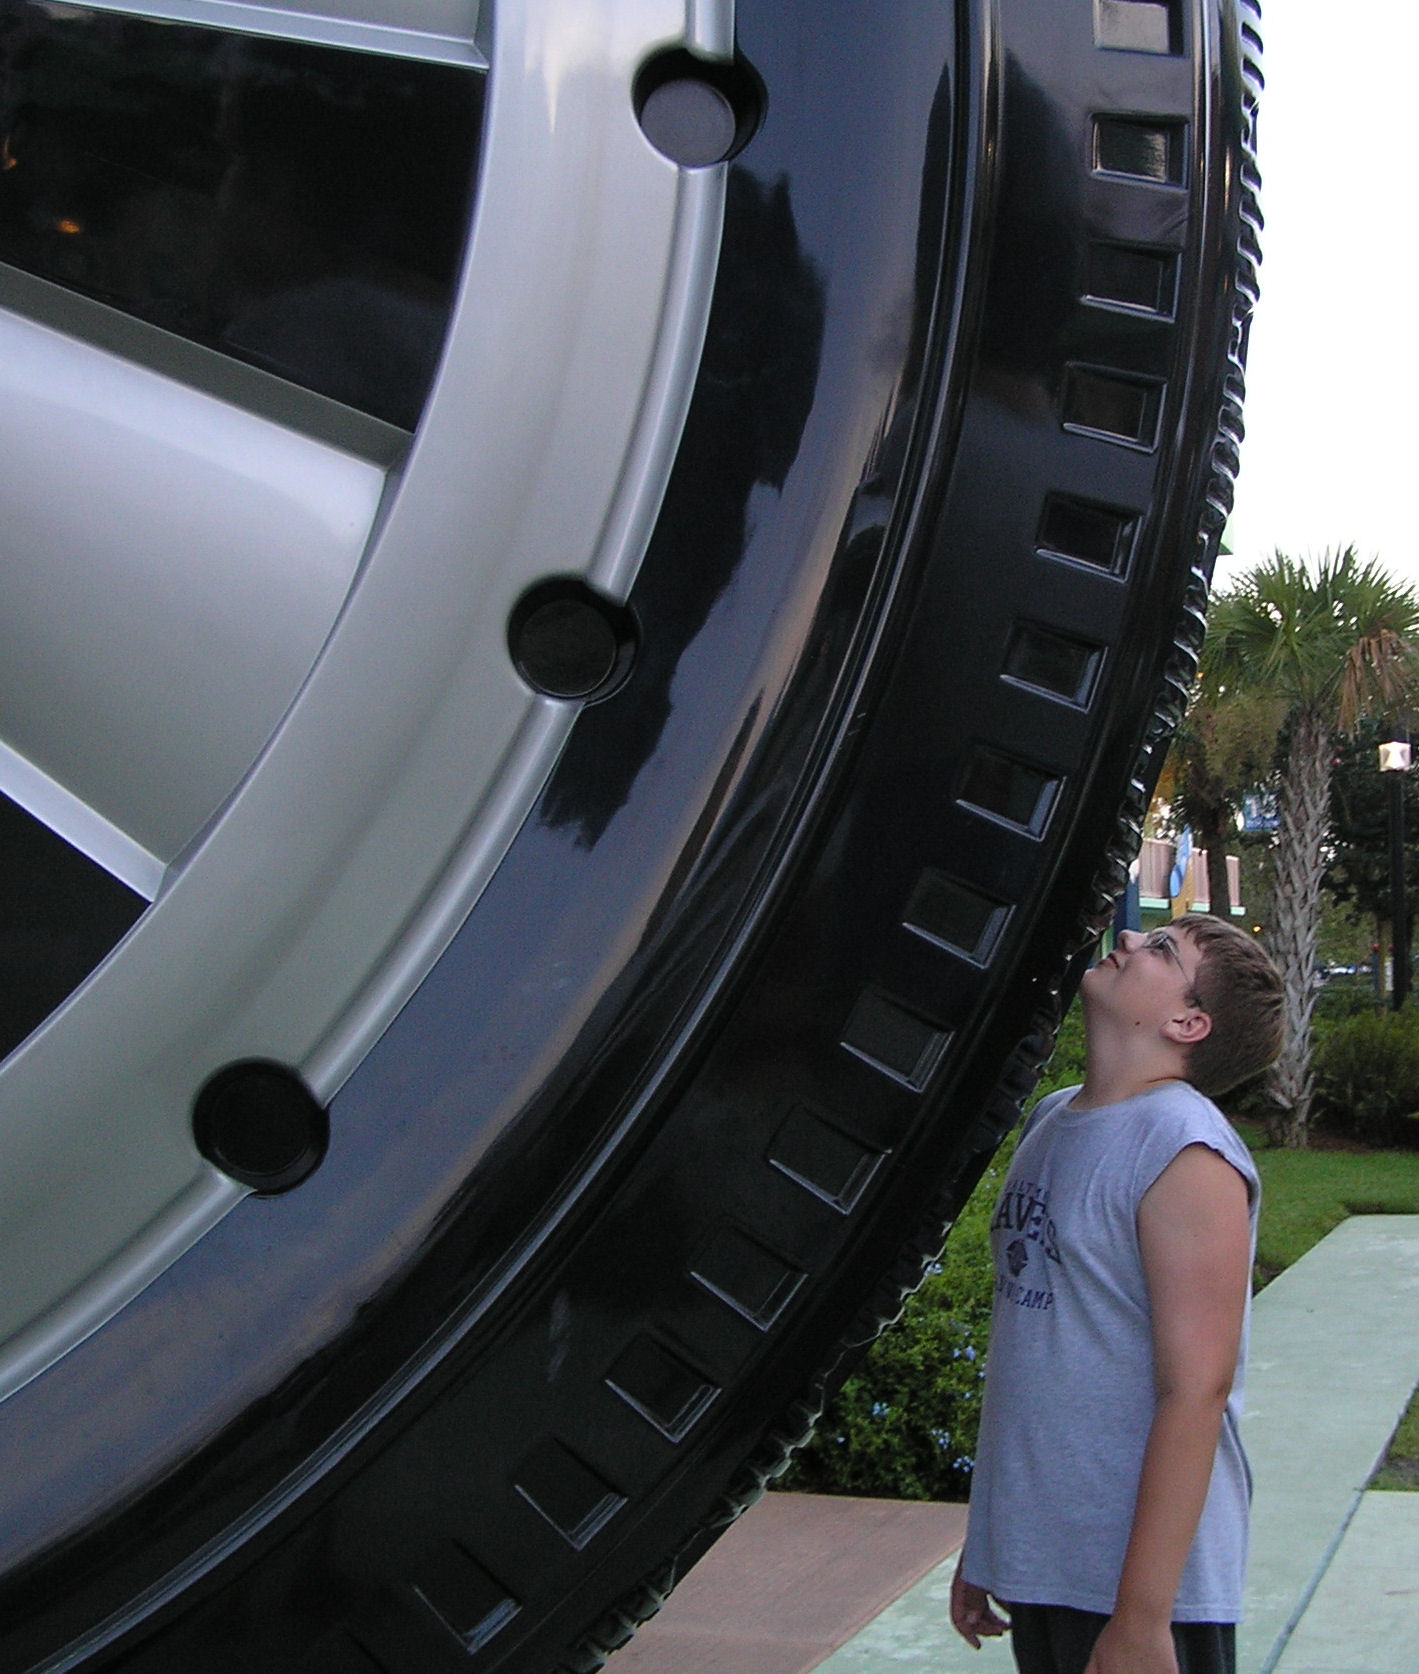 Here I am in front of an oversized Big Wheel at Disney's Pop Century Resort at Disney World.